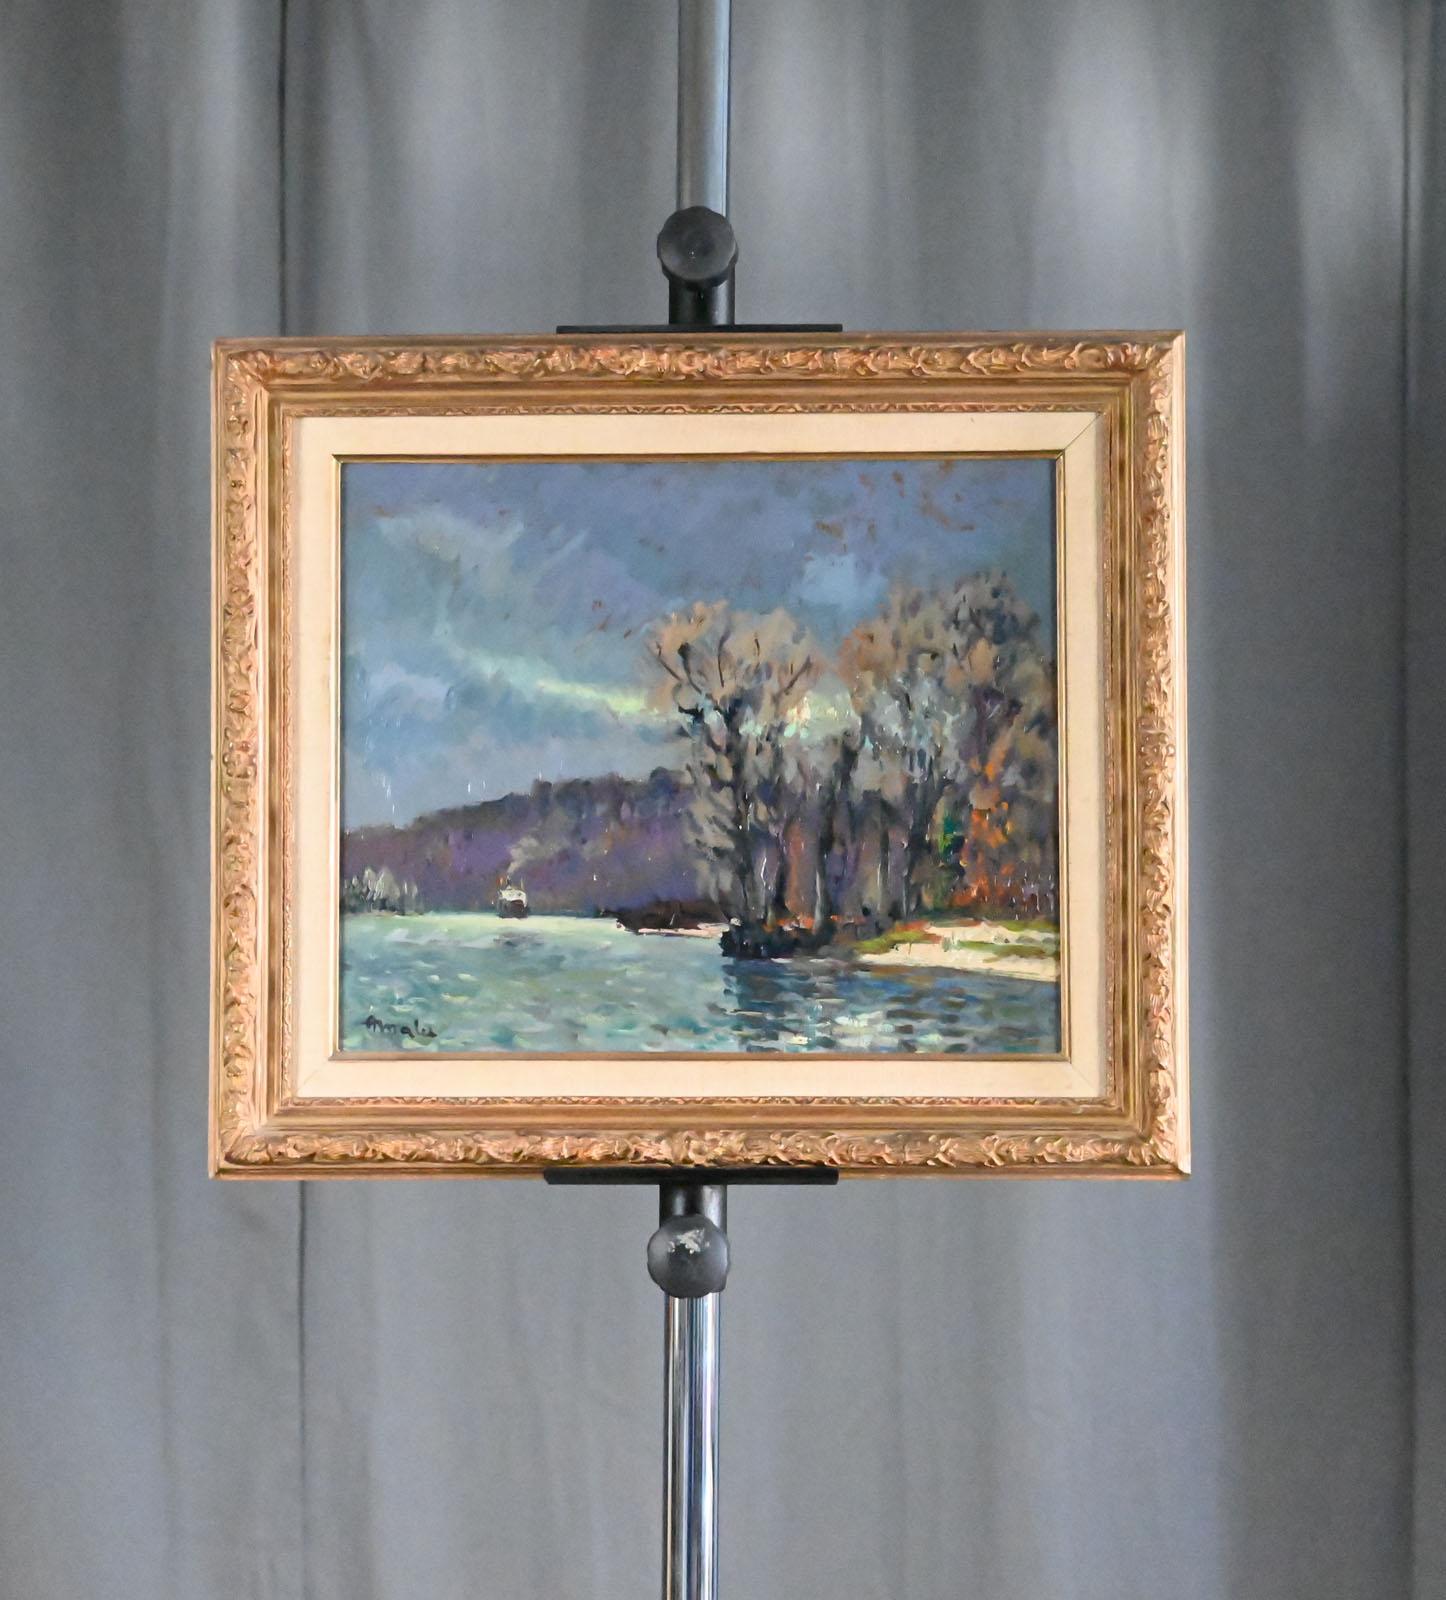 Albert MALET (1905-1986)

La Seine en amont de Rouen

Oil on panel (isorel)
Size: 38 x 46 cm
Signed lower left

In very good state of conservation. Recently cleaned and varnished.
Beautiful carved and gilded frame with closed corners. FREE
Size with